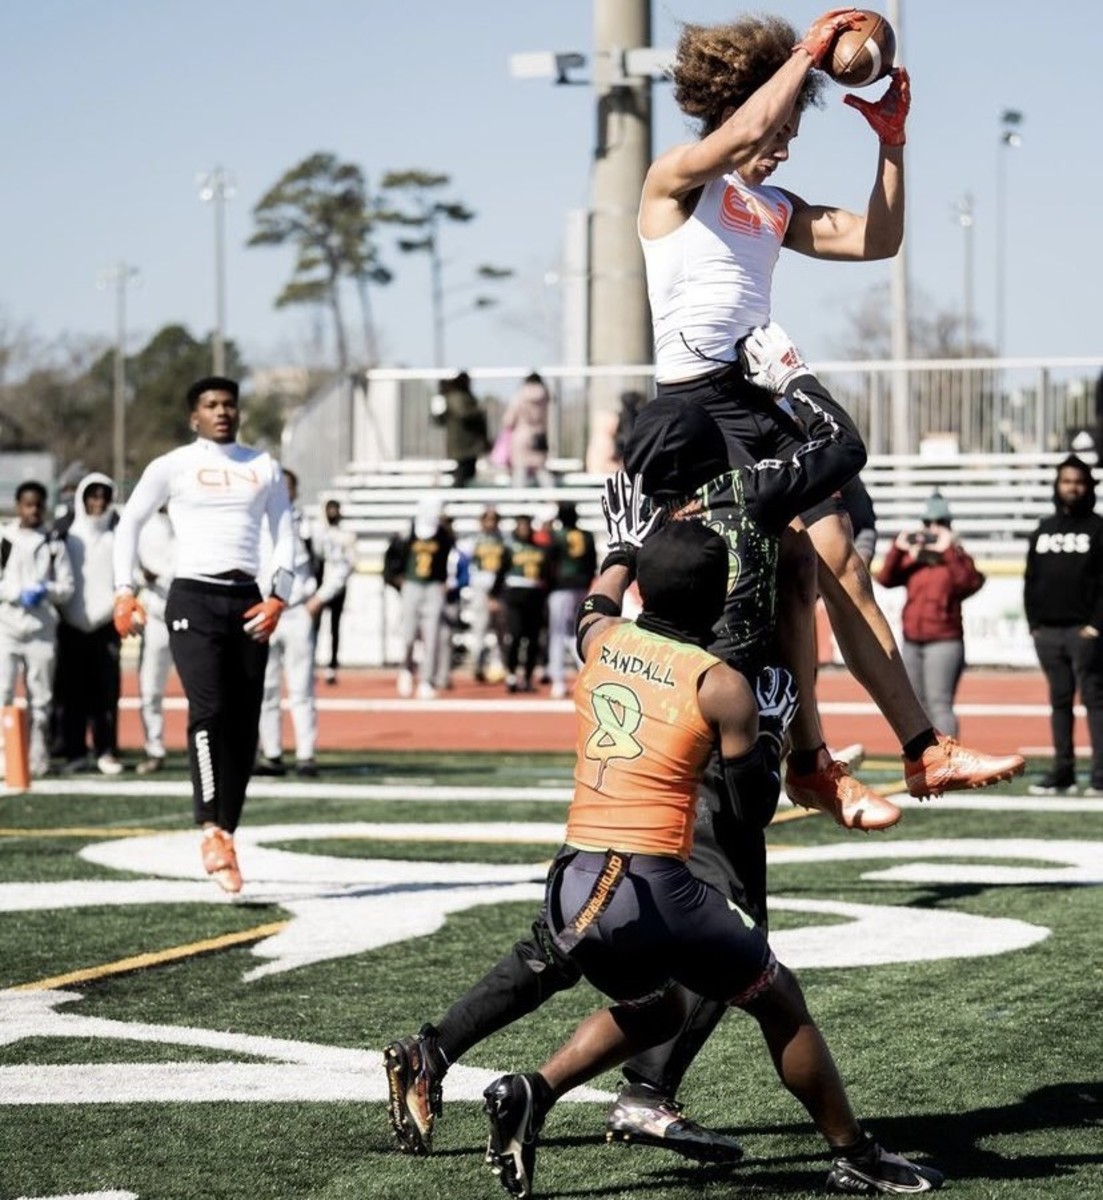 Cayden Lee shows his hops in a 7-on-7 competition.